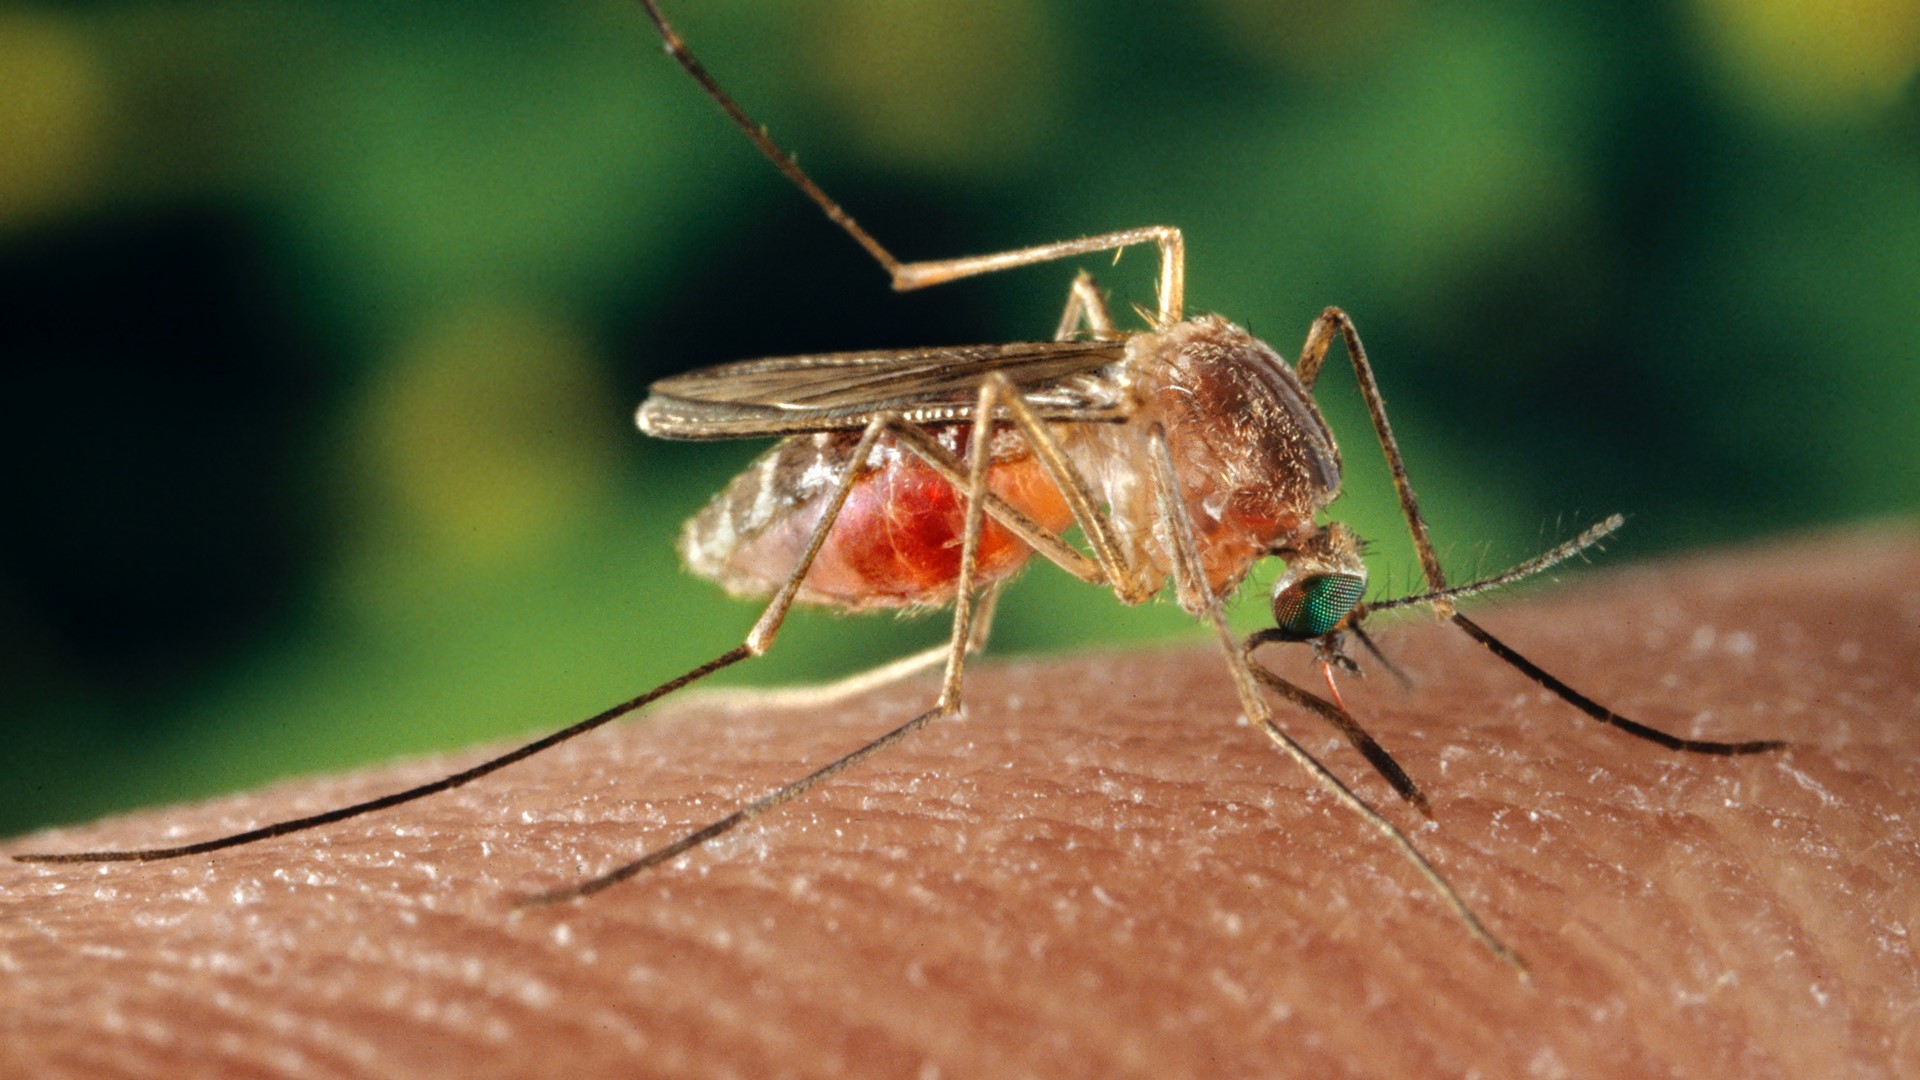 Eleven people in the U.S. have now died from the mosquito-borne illness known as Eastern Equine Encephalitis, or Triple-E.